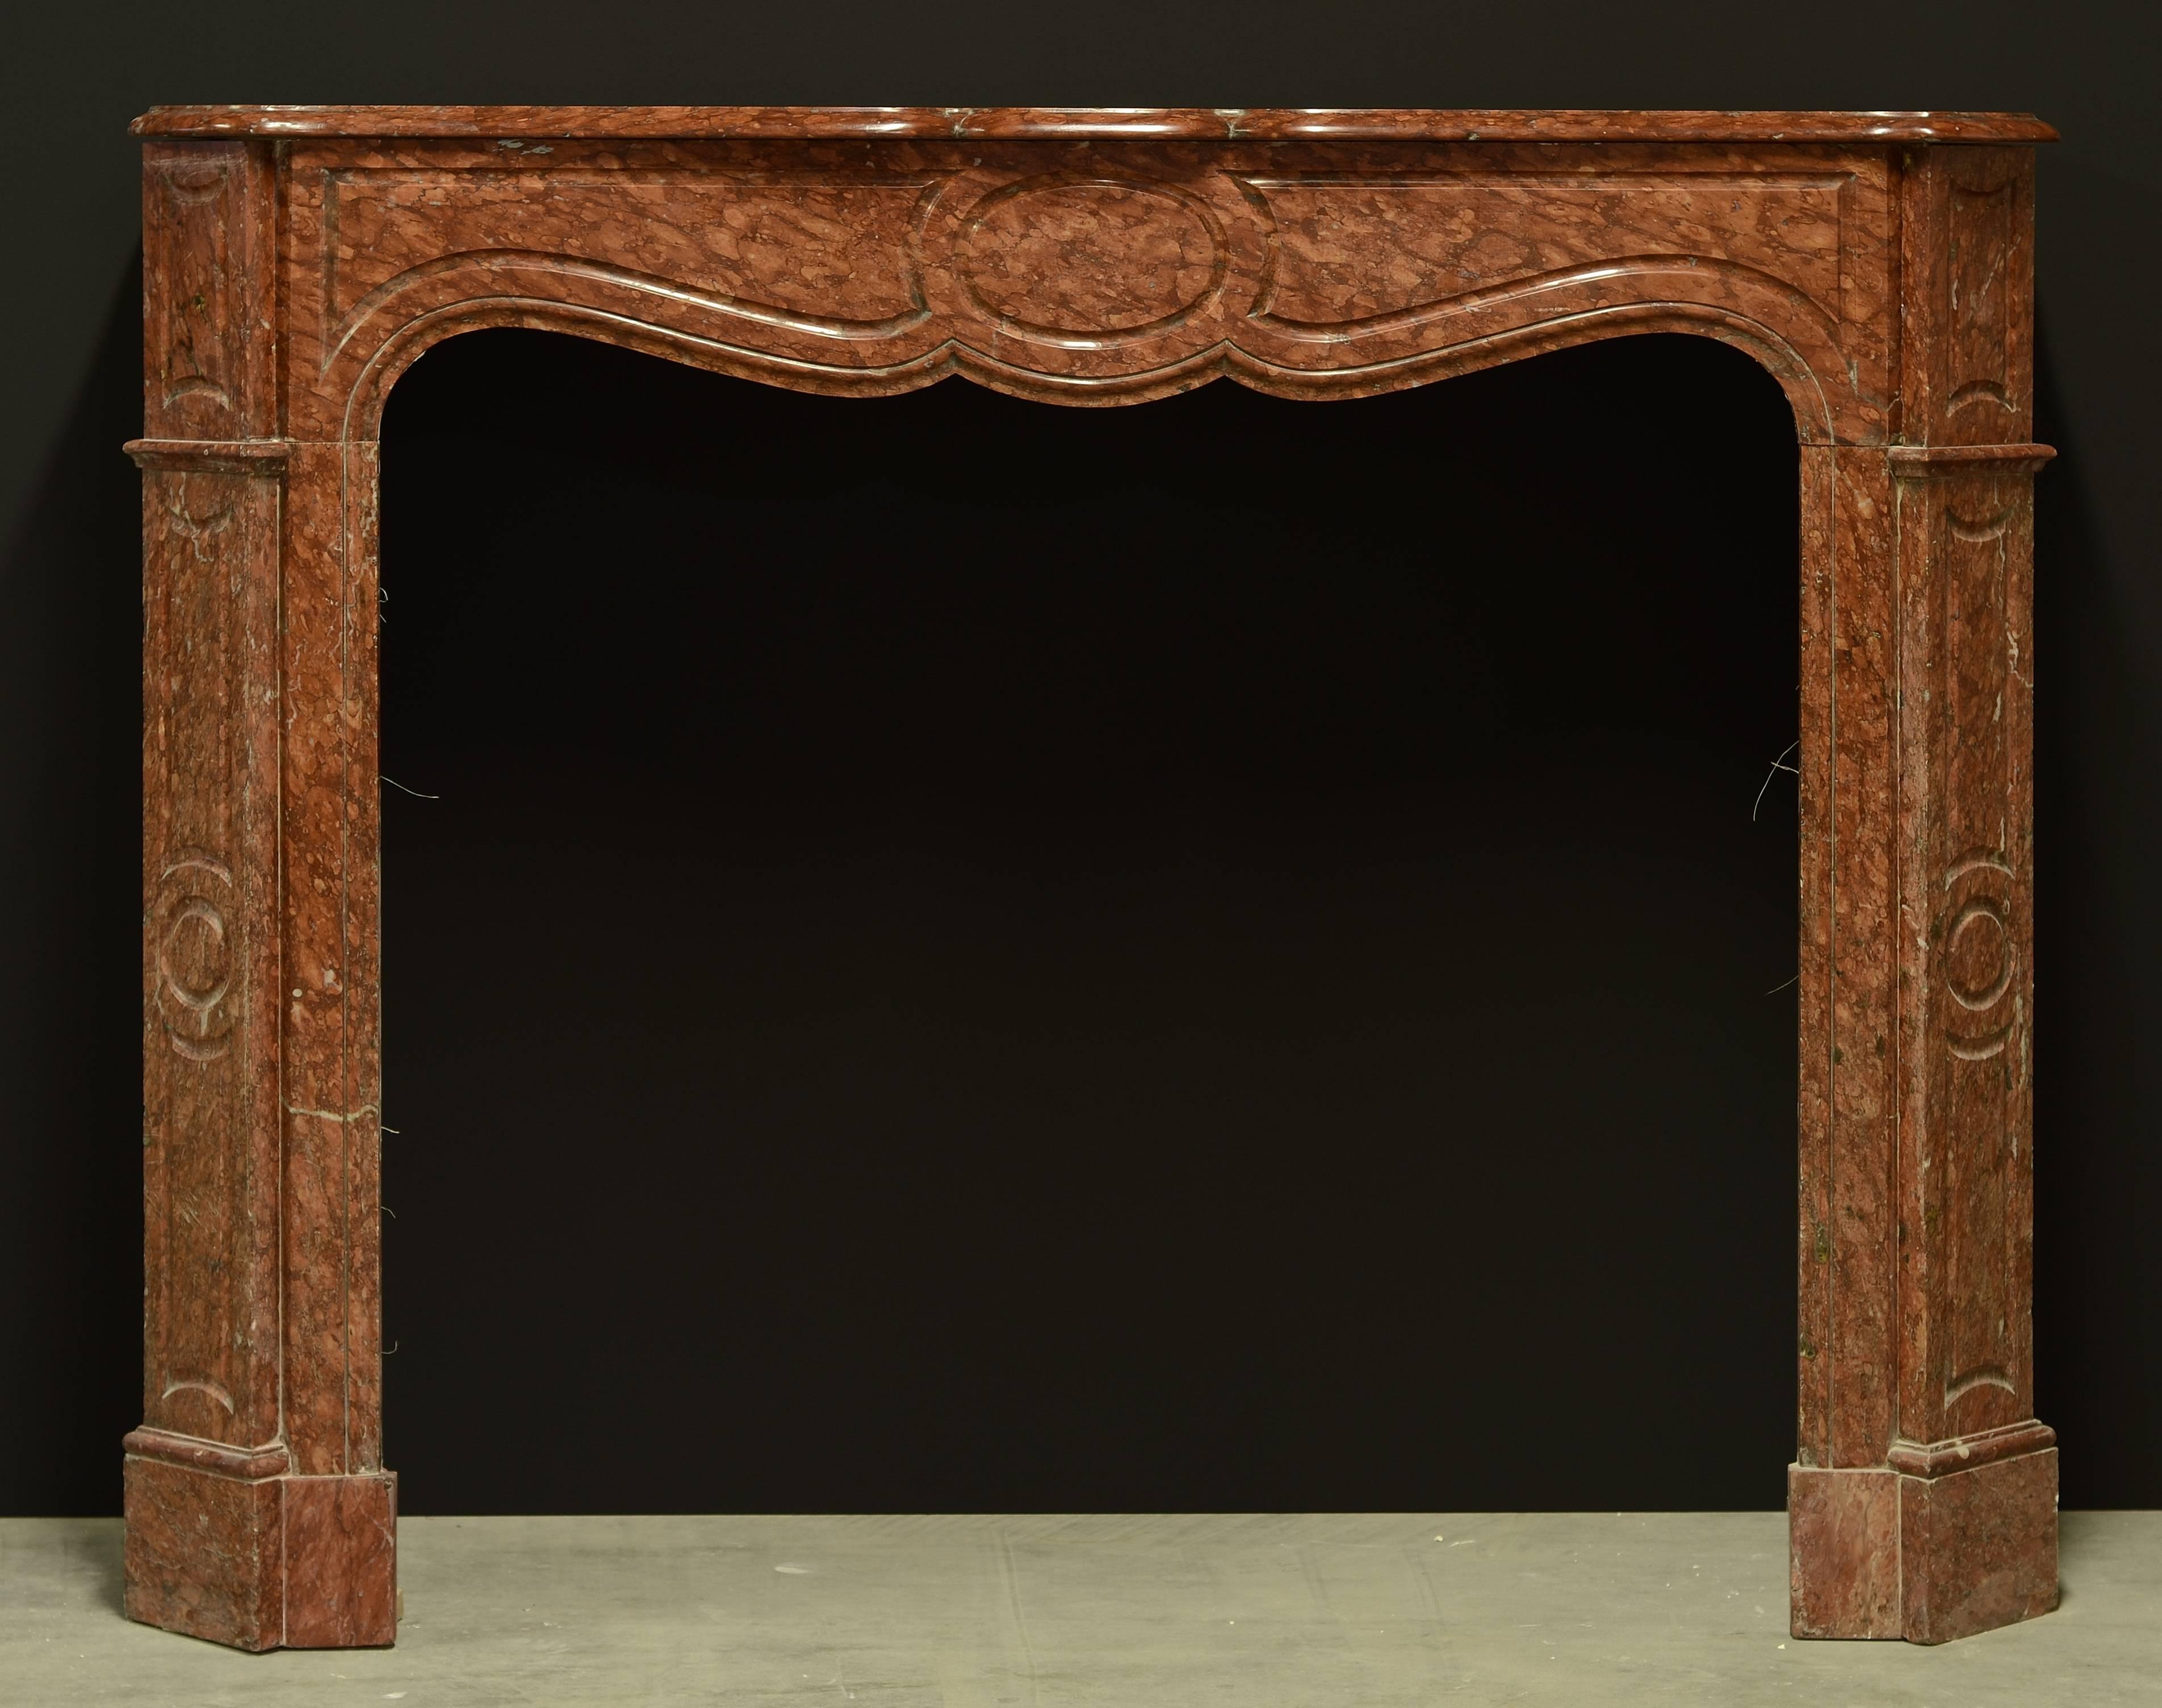 Warm red colored Pompadour style fireplace mantel from France, 19th century.